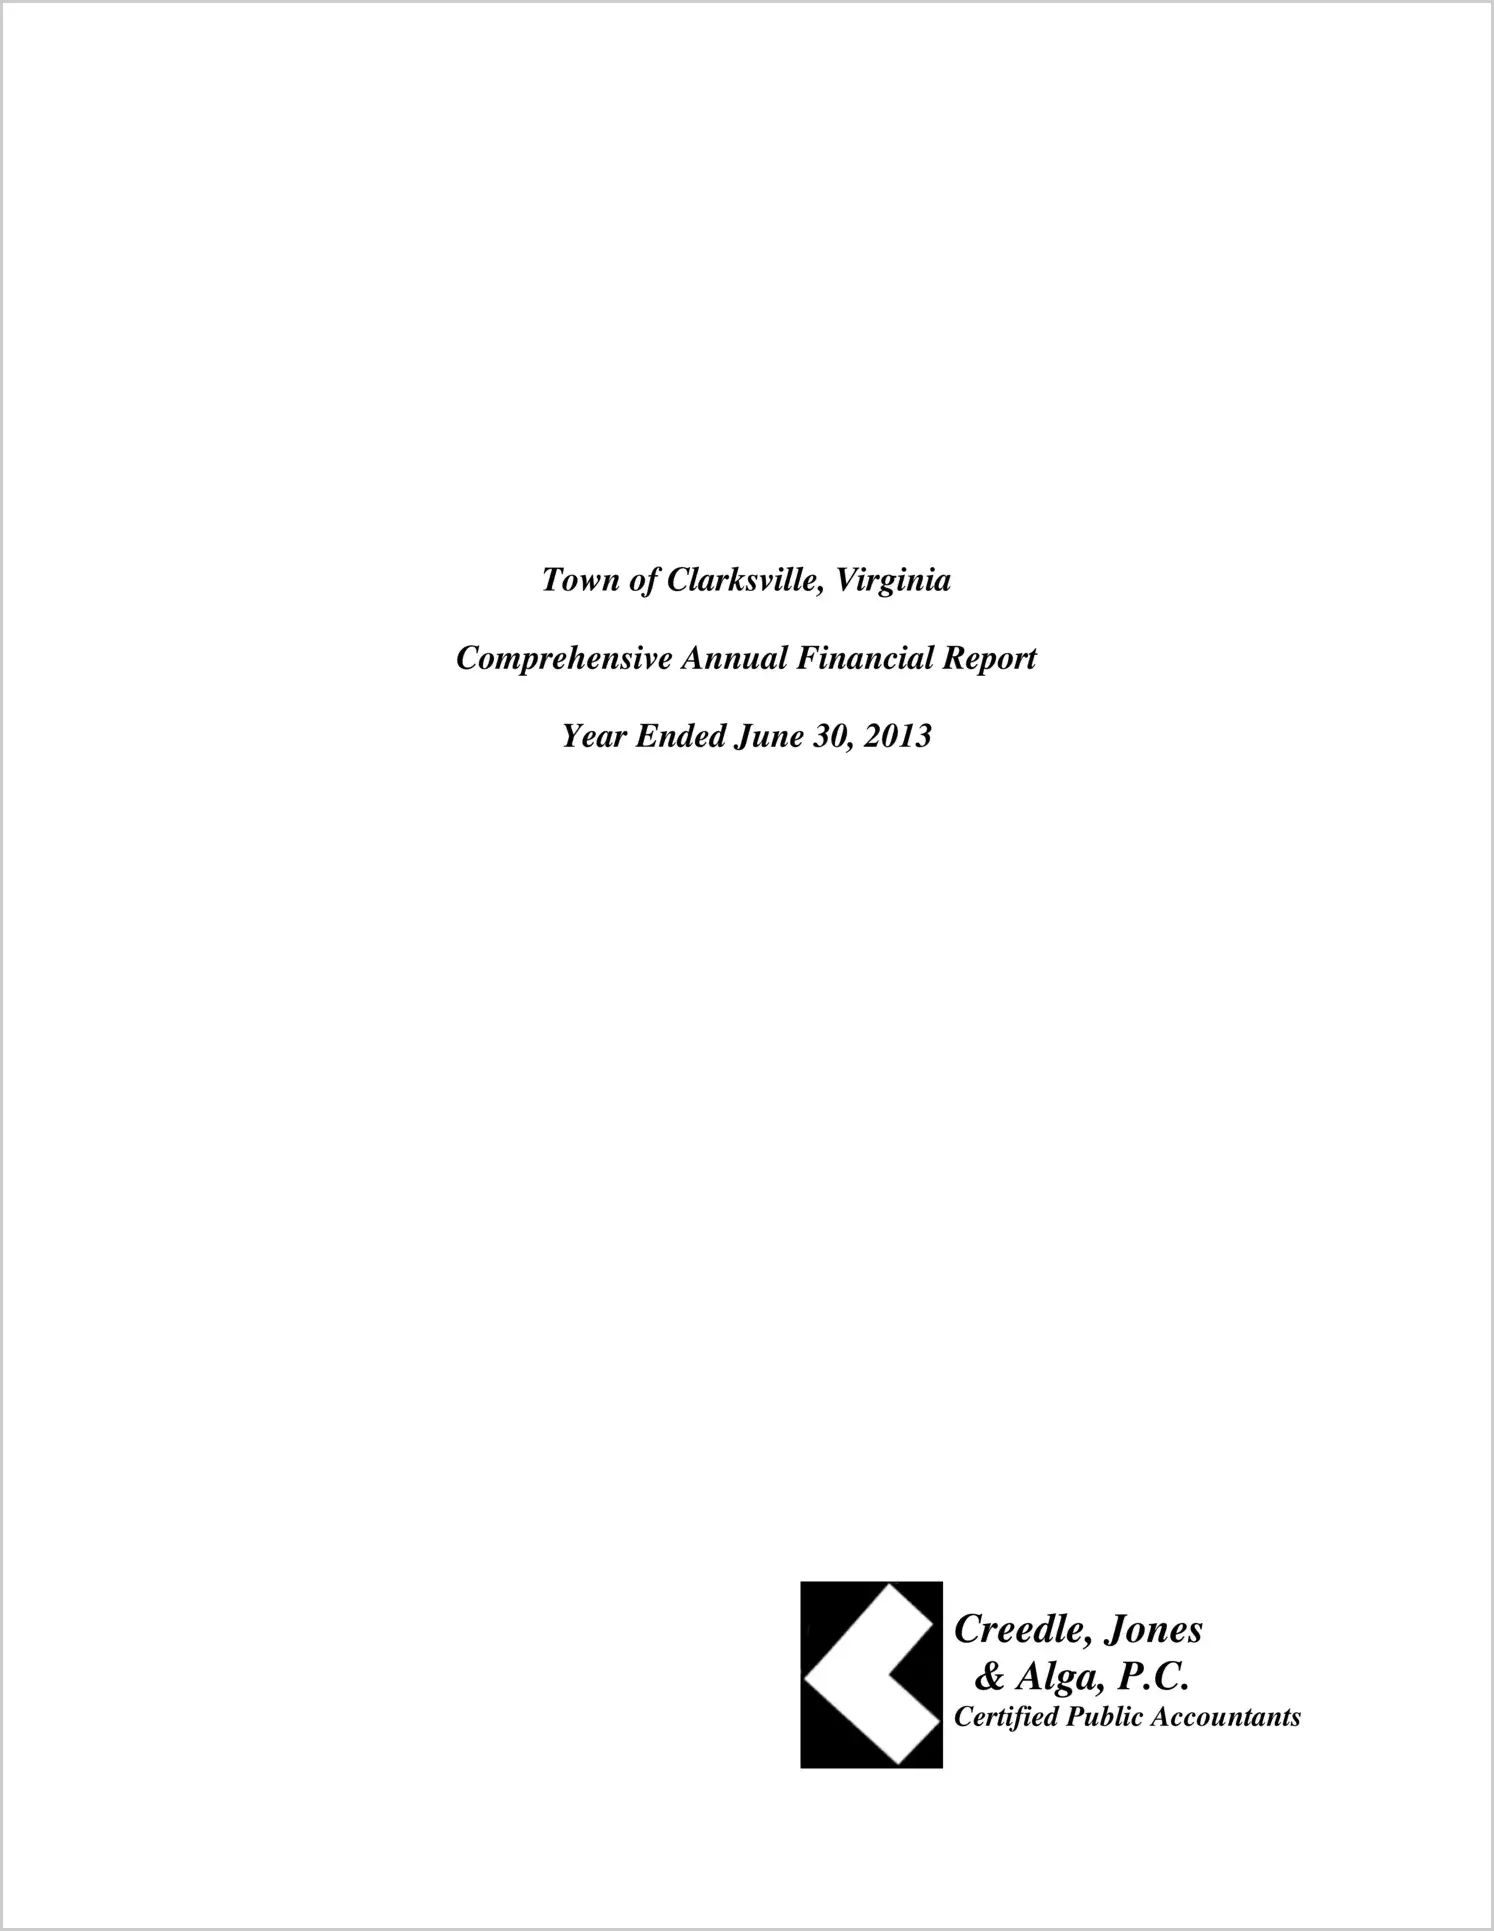 2013 Annual Financial Report for Town of Clarksville